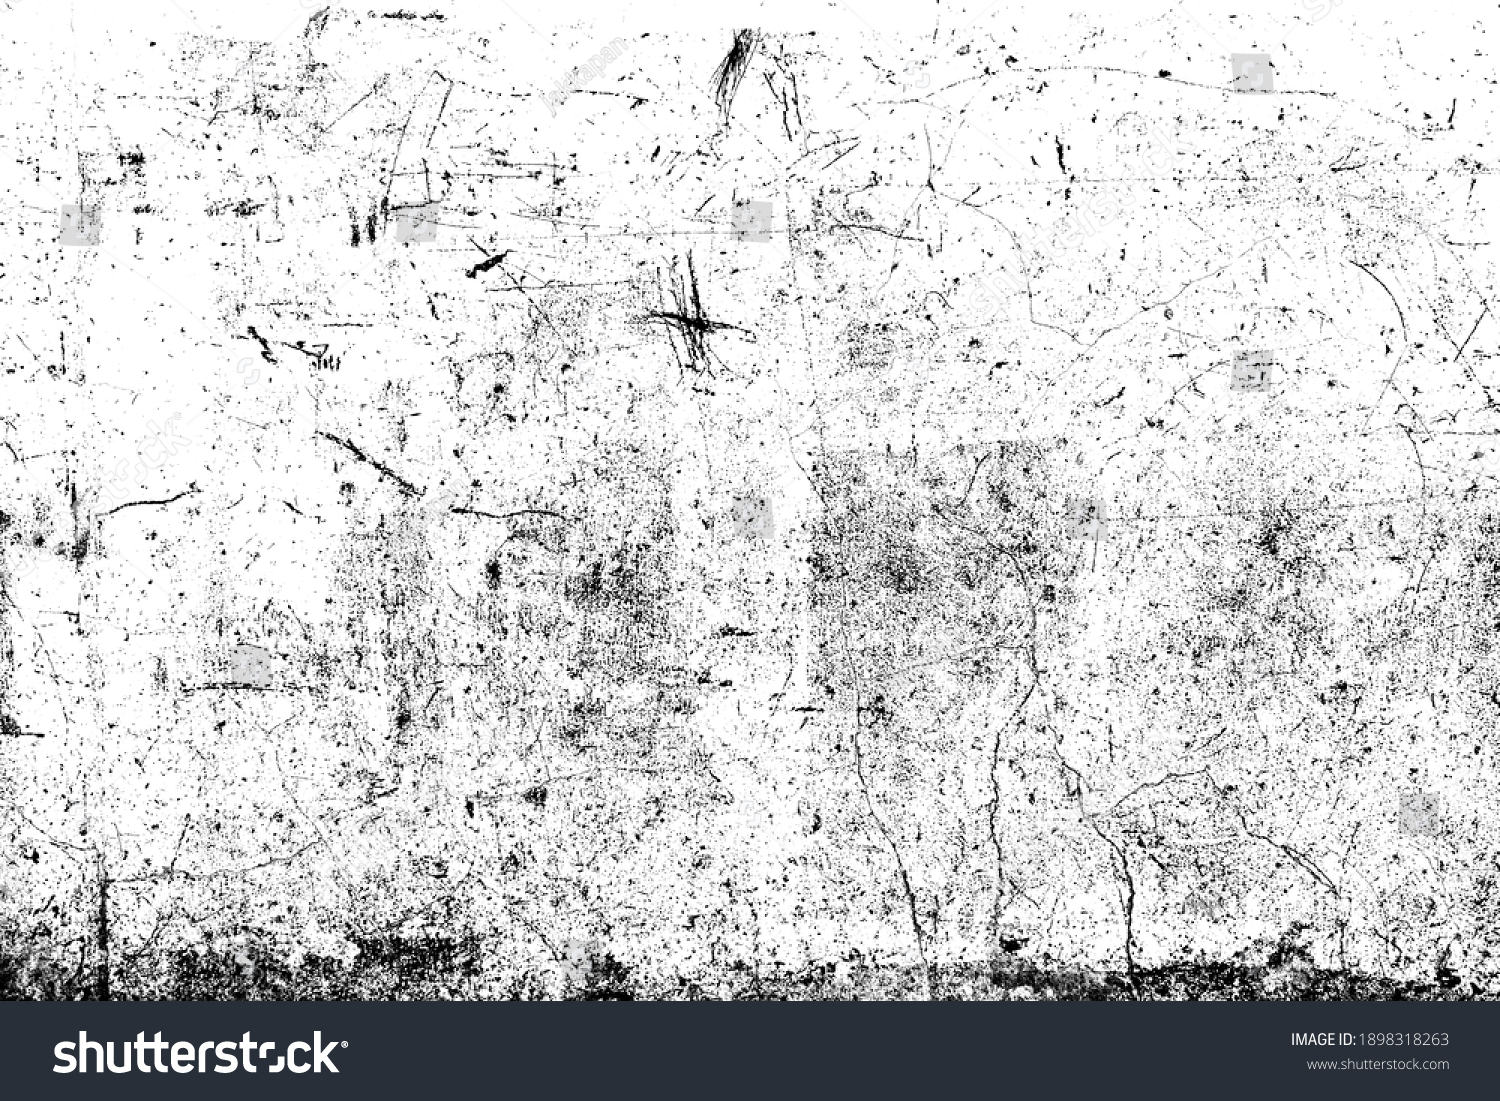 Abstract dirty or scratch aging effect. Dusty and grungy scratch texture material or surface. Use for overlay effect vintage grunge style design. #1898318263